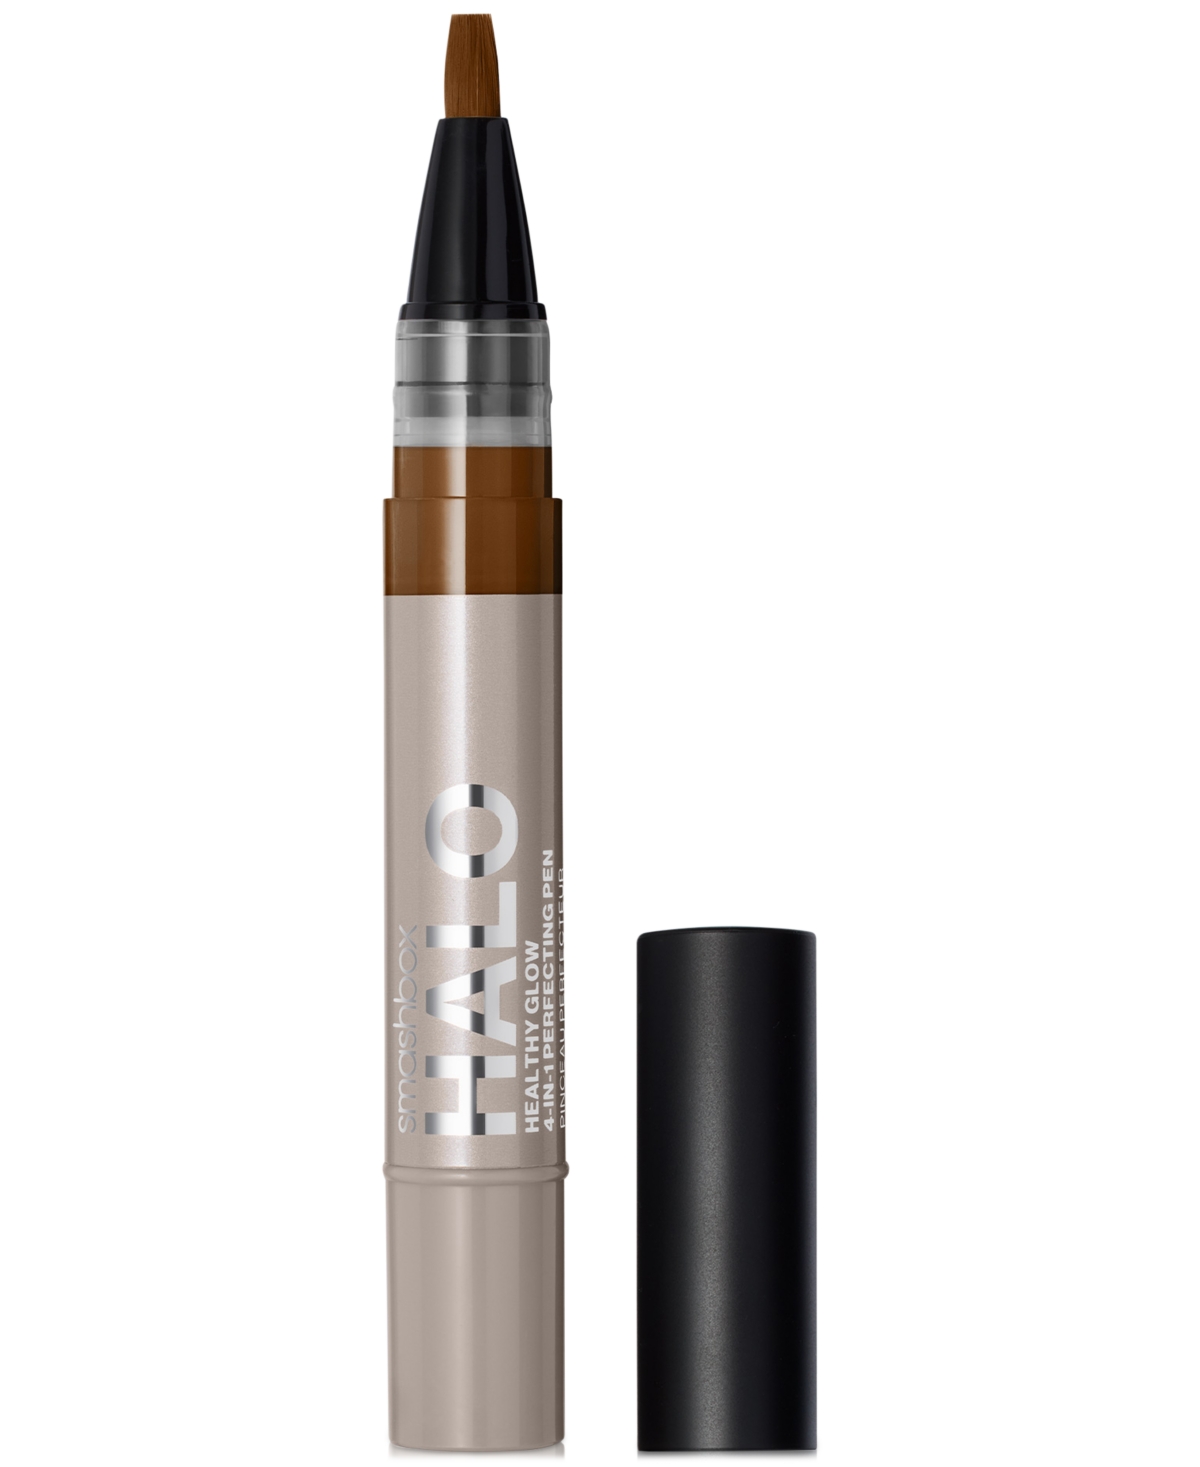 Smashbox Halo Healthy Glow 4-in-1 Perfecting Pen In D-n (level-one Dark With A Neutral Under